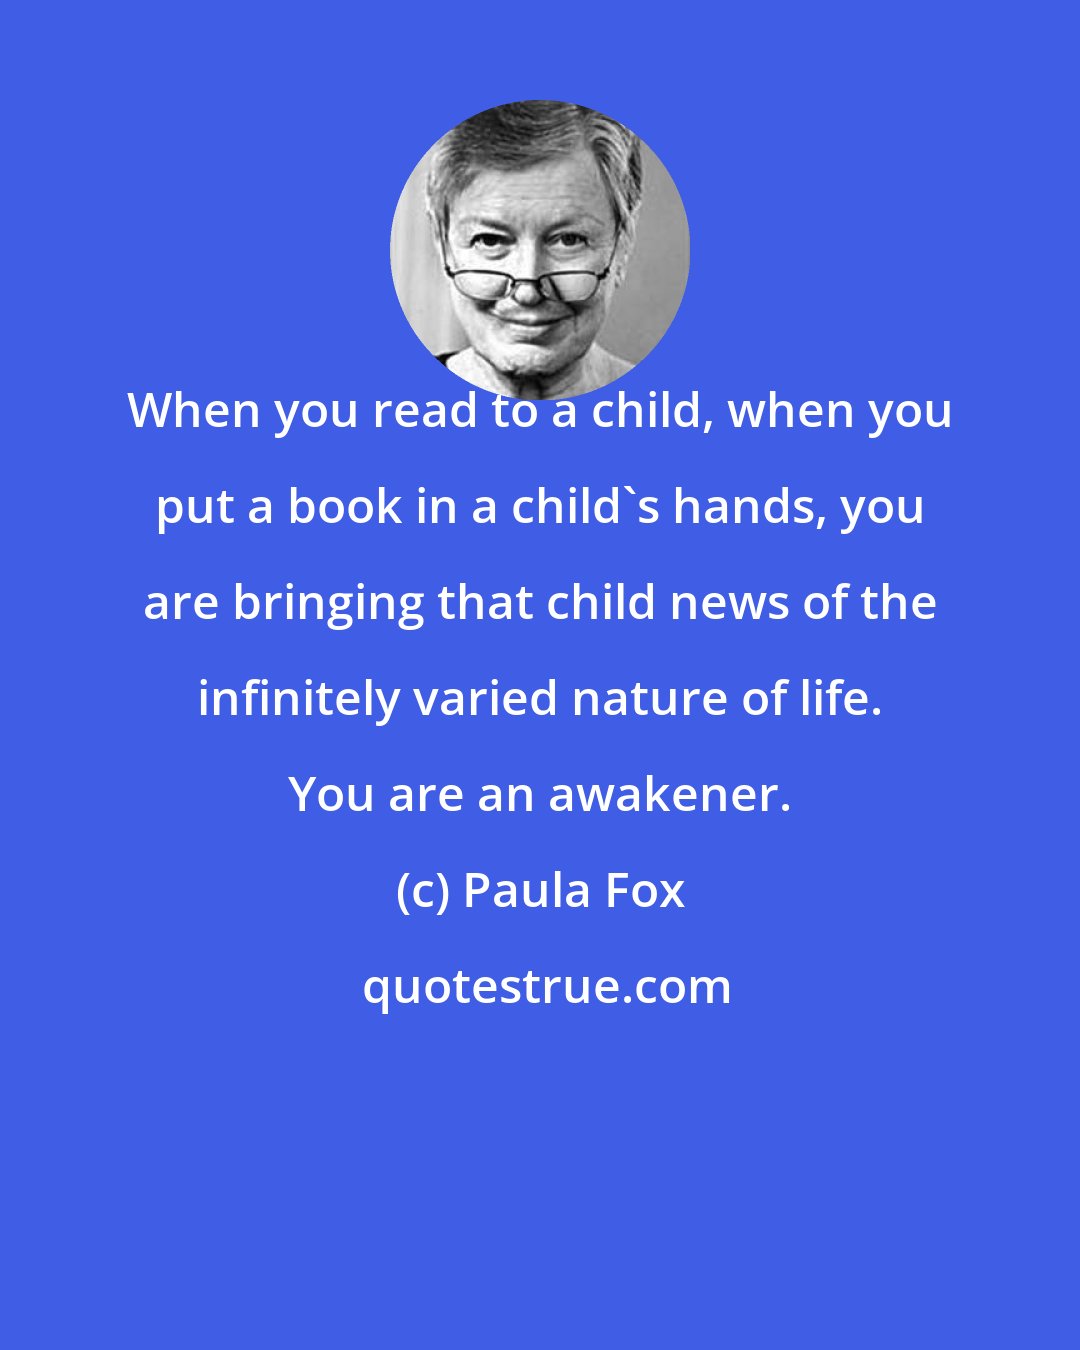 Paula Fox: When you read to a child, when you put a book in a child's hands, you are bringing that child news of the infinitely varied nature of life. You are an awakener.